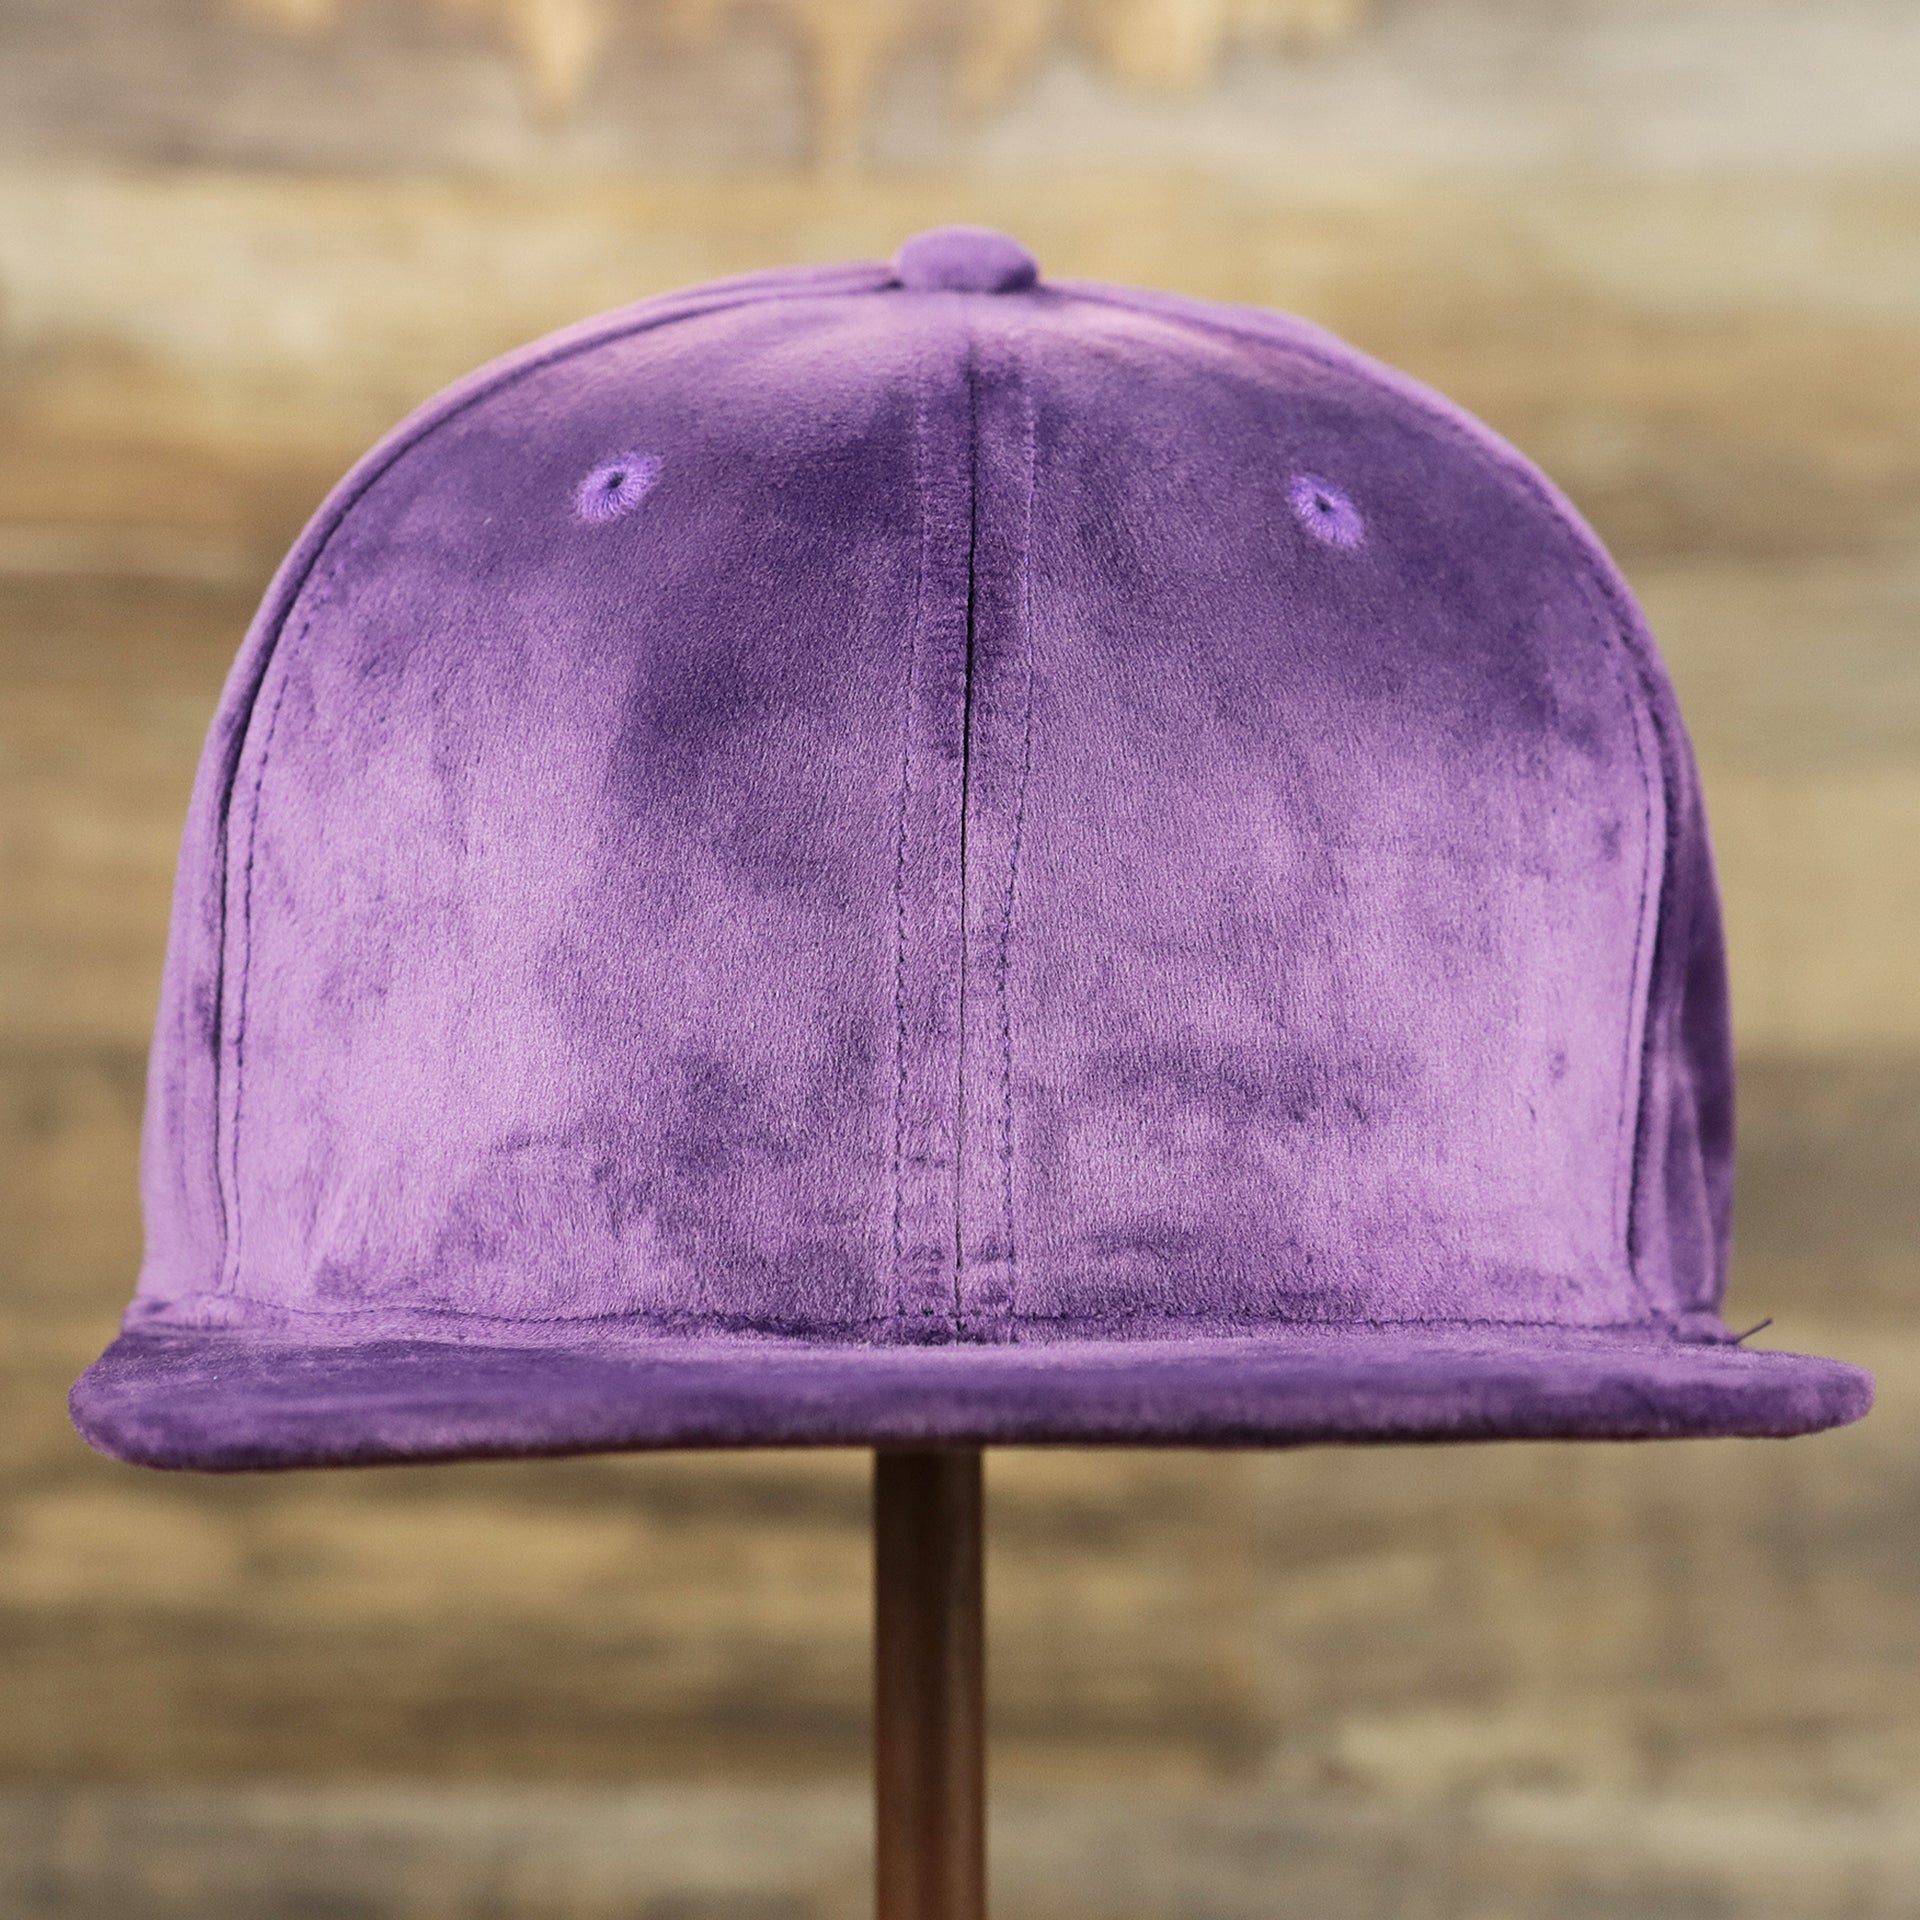 The front of the Velour Blank Concord Grape Snapback Cap | Purple Snap Cap